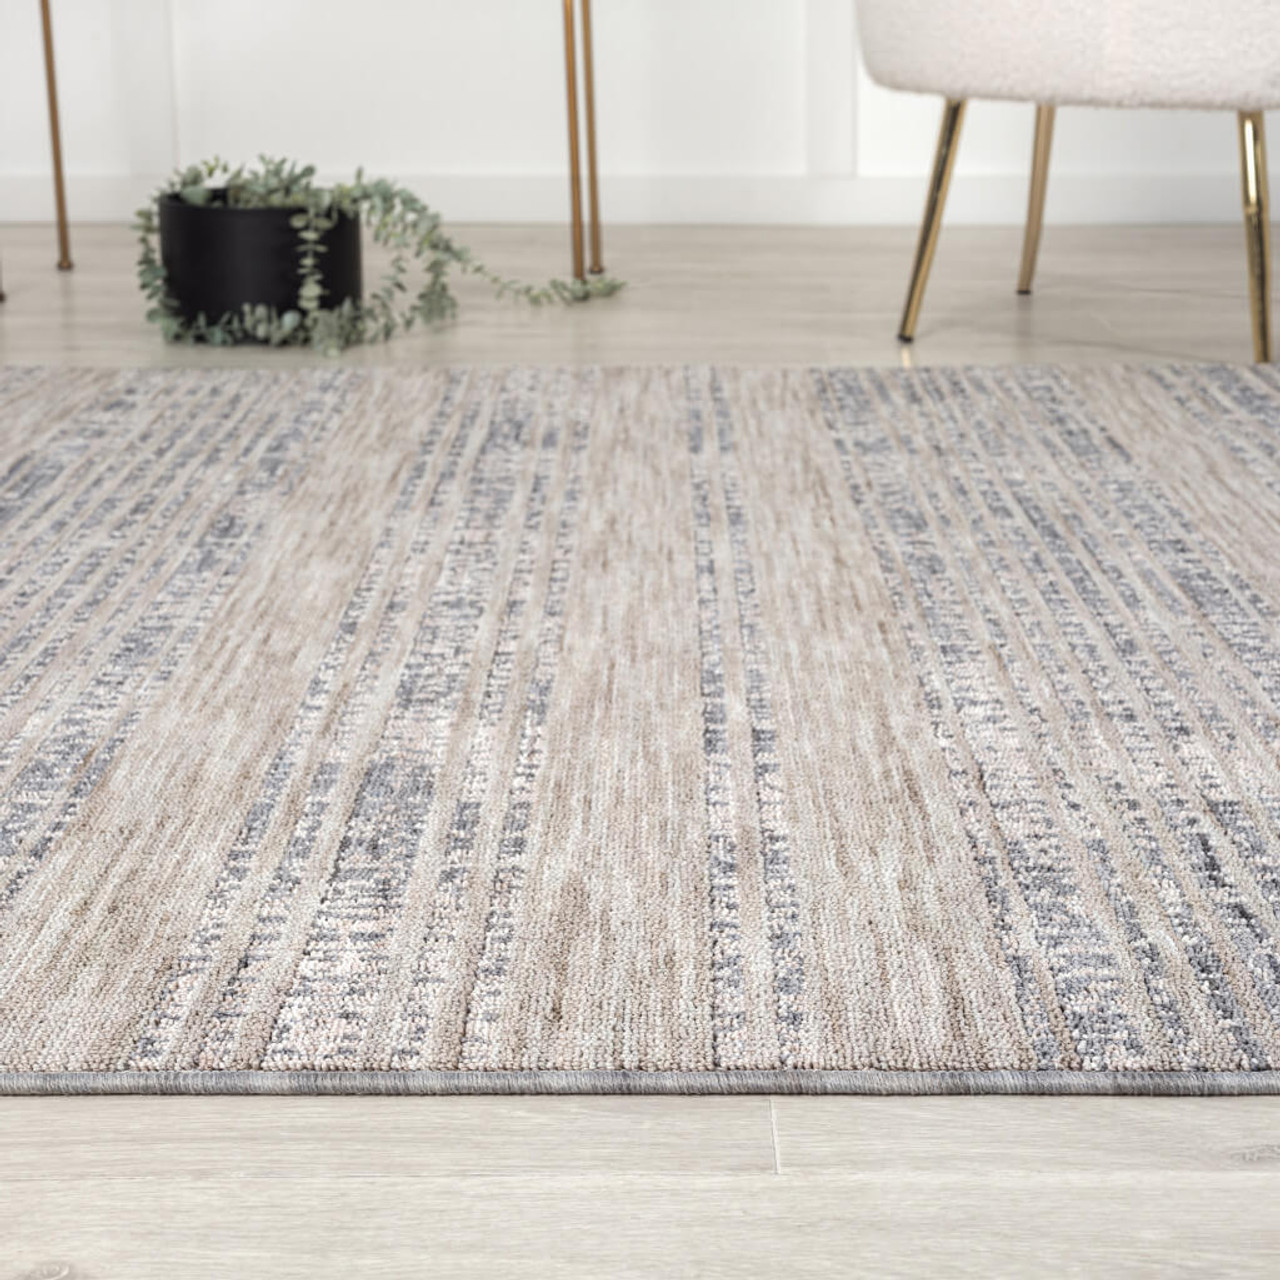 5' X 7' Ivory And Blue Striped Indoor Outdoor Area Rug